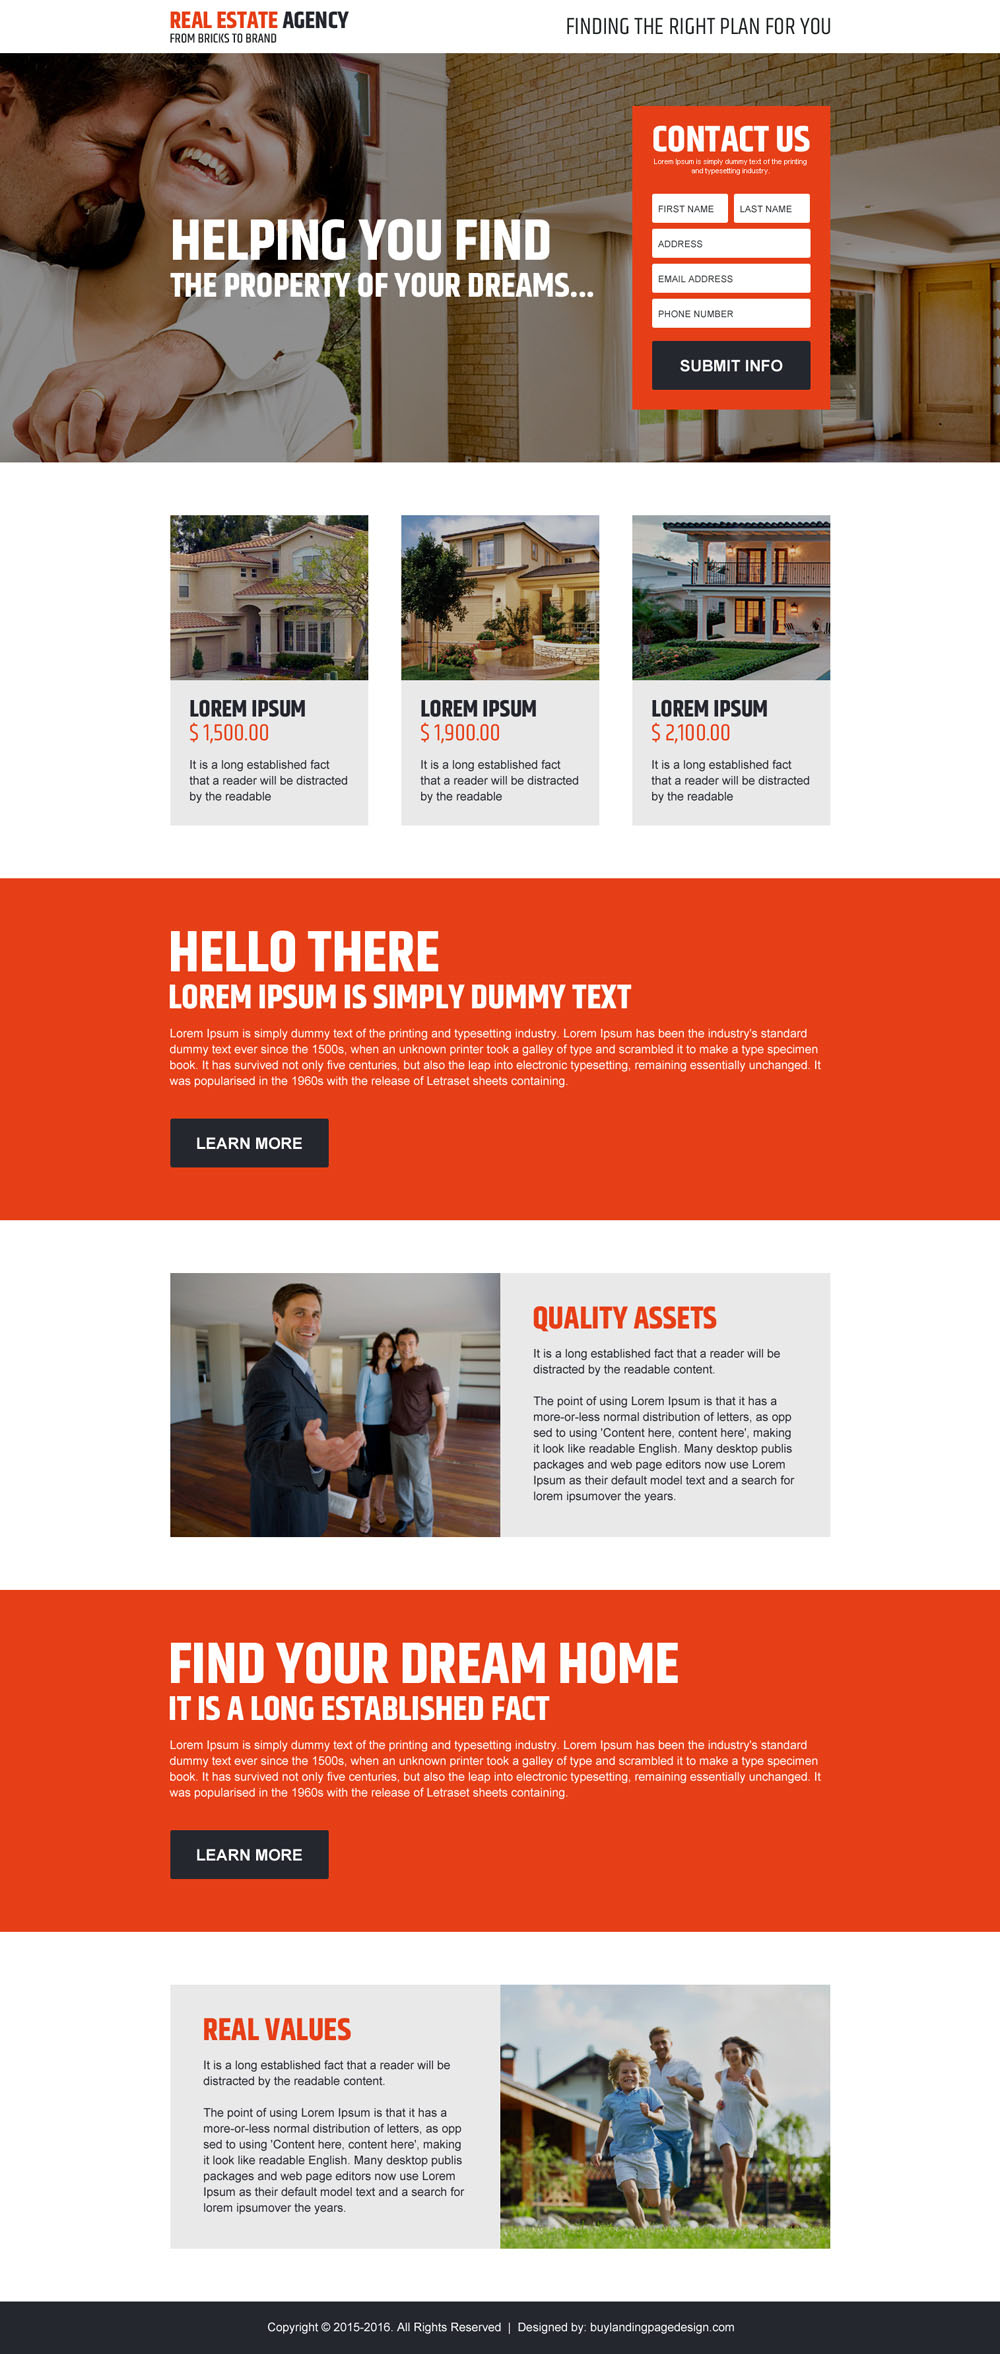 real-estate-agency-for-dreams-property-high-converting-landing-page-design-018